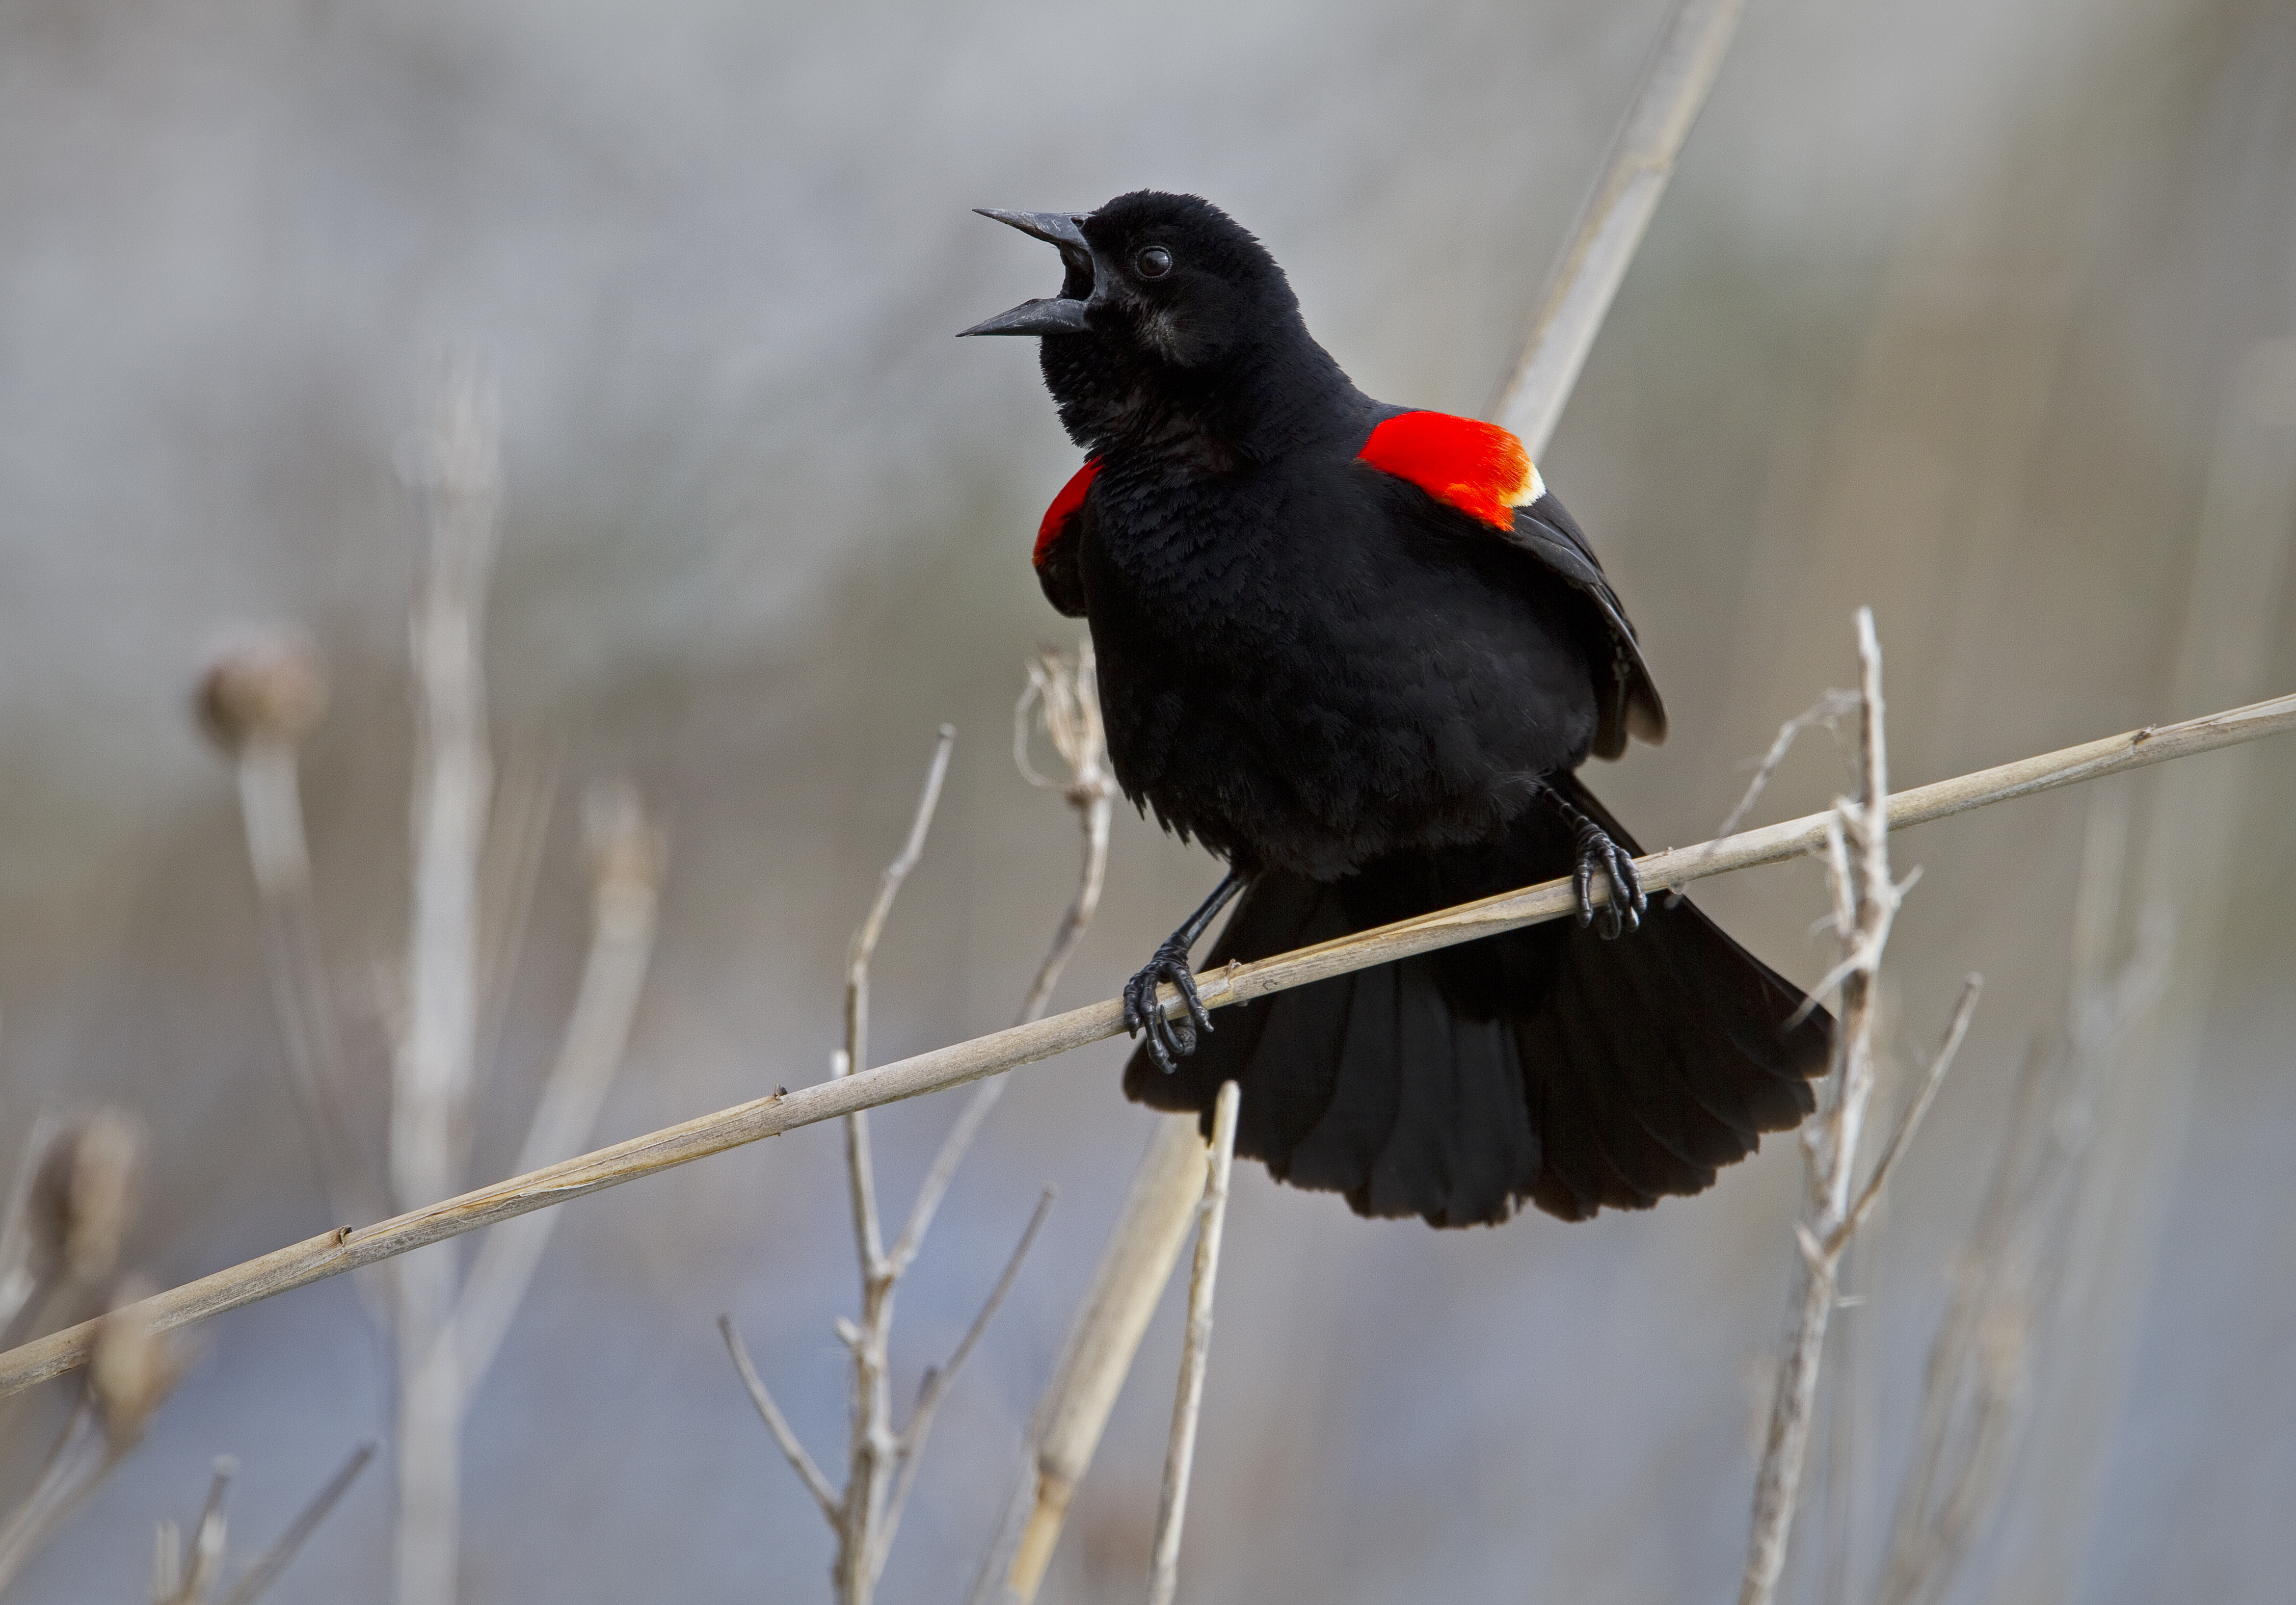 Male Red-winged Blackbirds arrive in our area in early spring and lay claim to their nesting territories by puffing their their bright red “epaulets” while singing their rattly “Konk-a-ree!” song. Photo: François Portmann